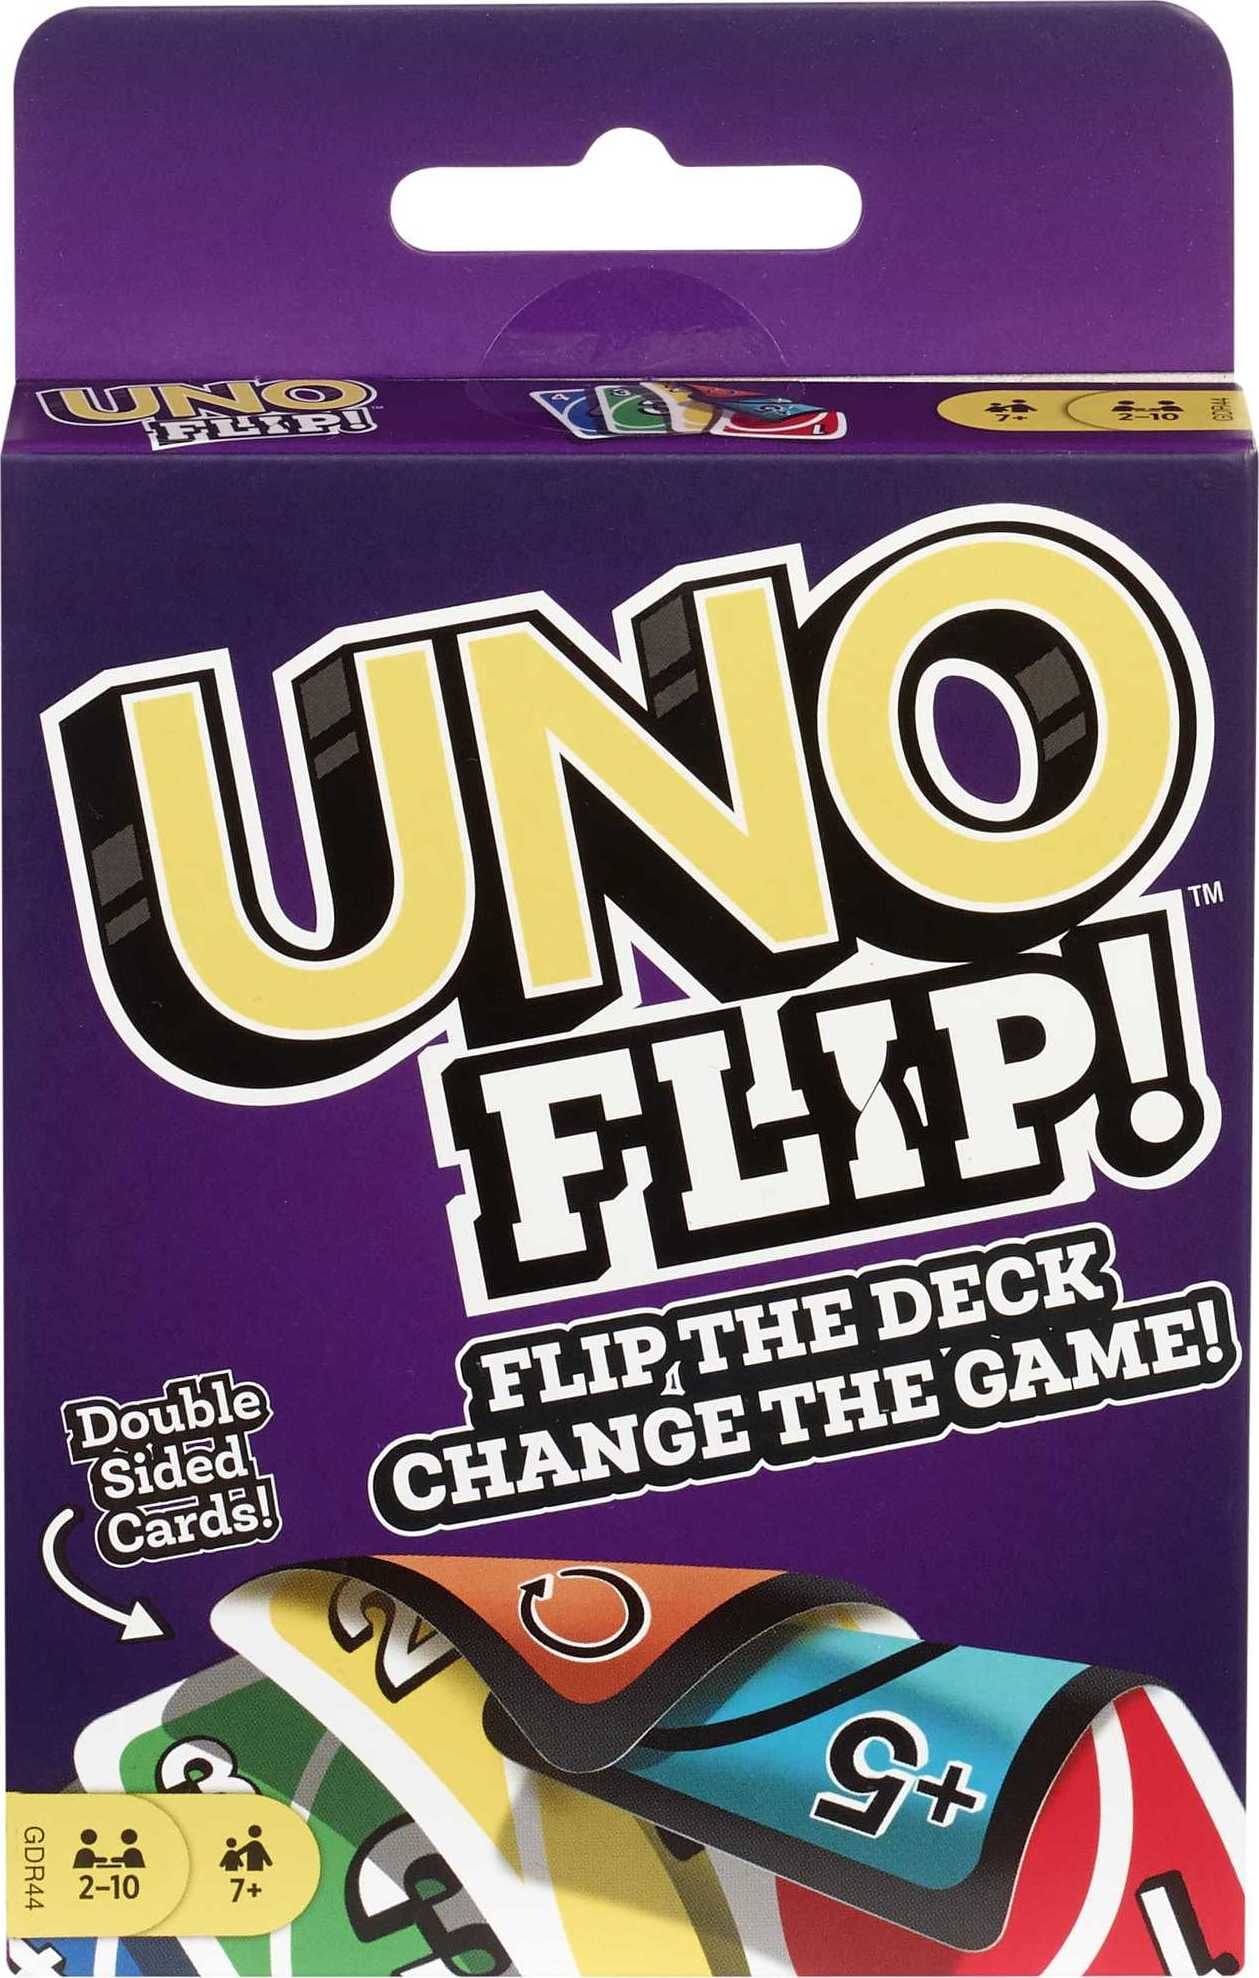 UNO Flip! Card Game for Kids, Adults & Family Night with Double-Sided Cards, Light & Dark